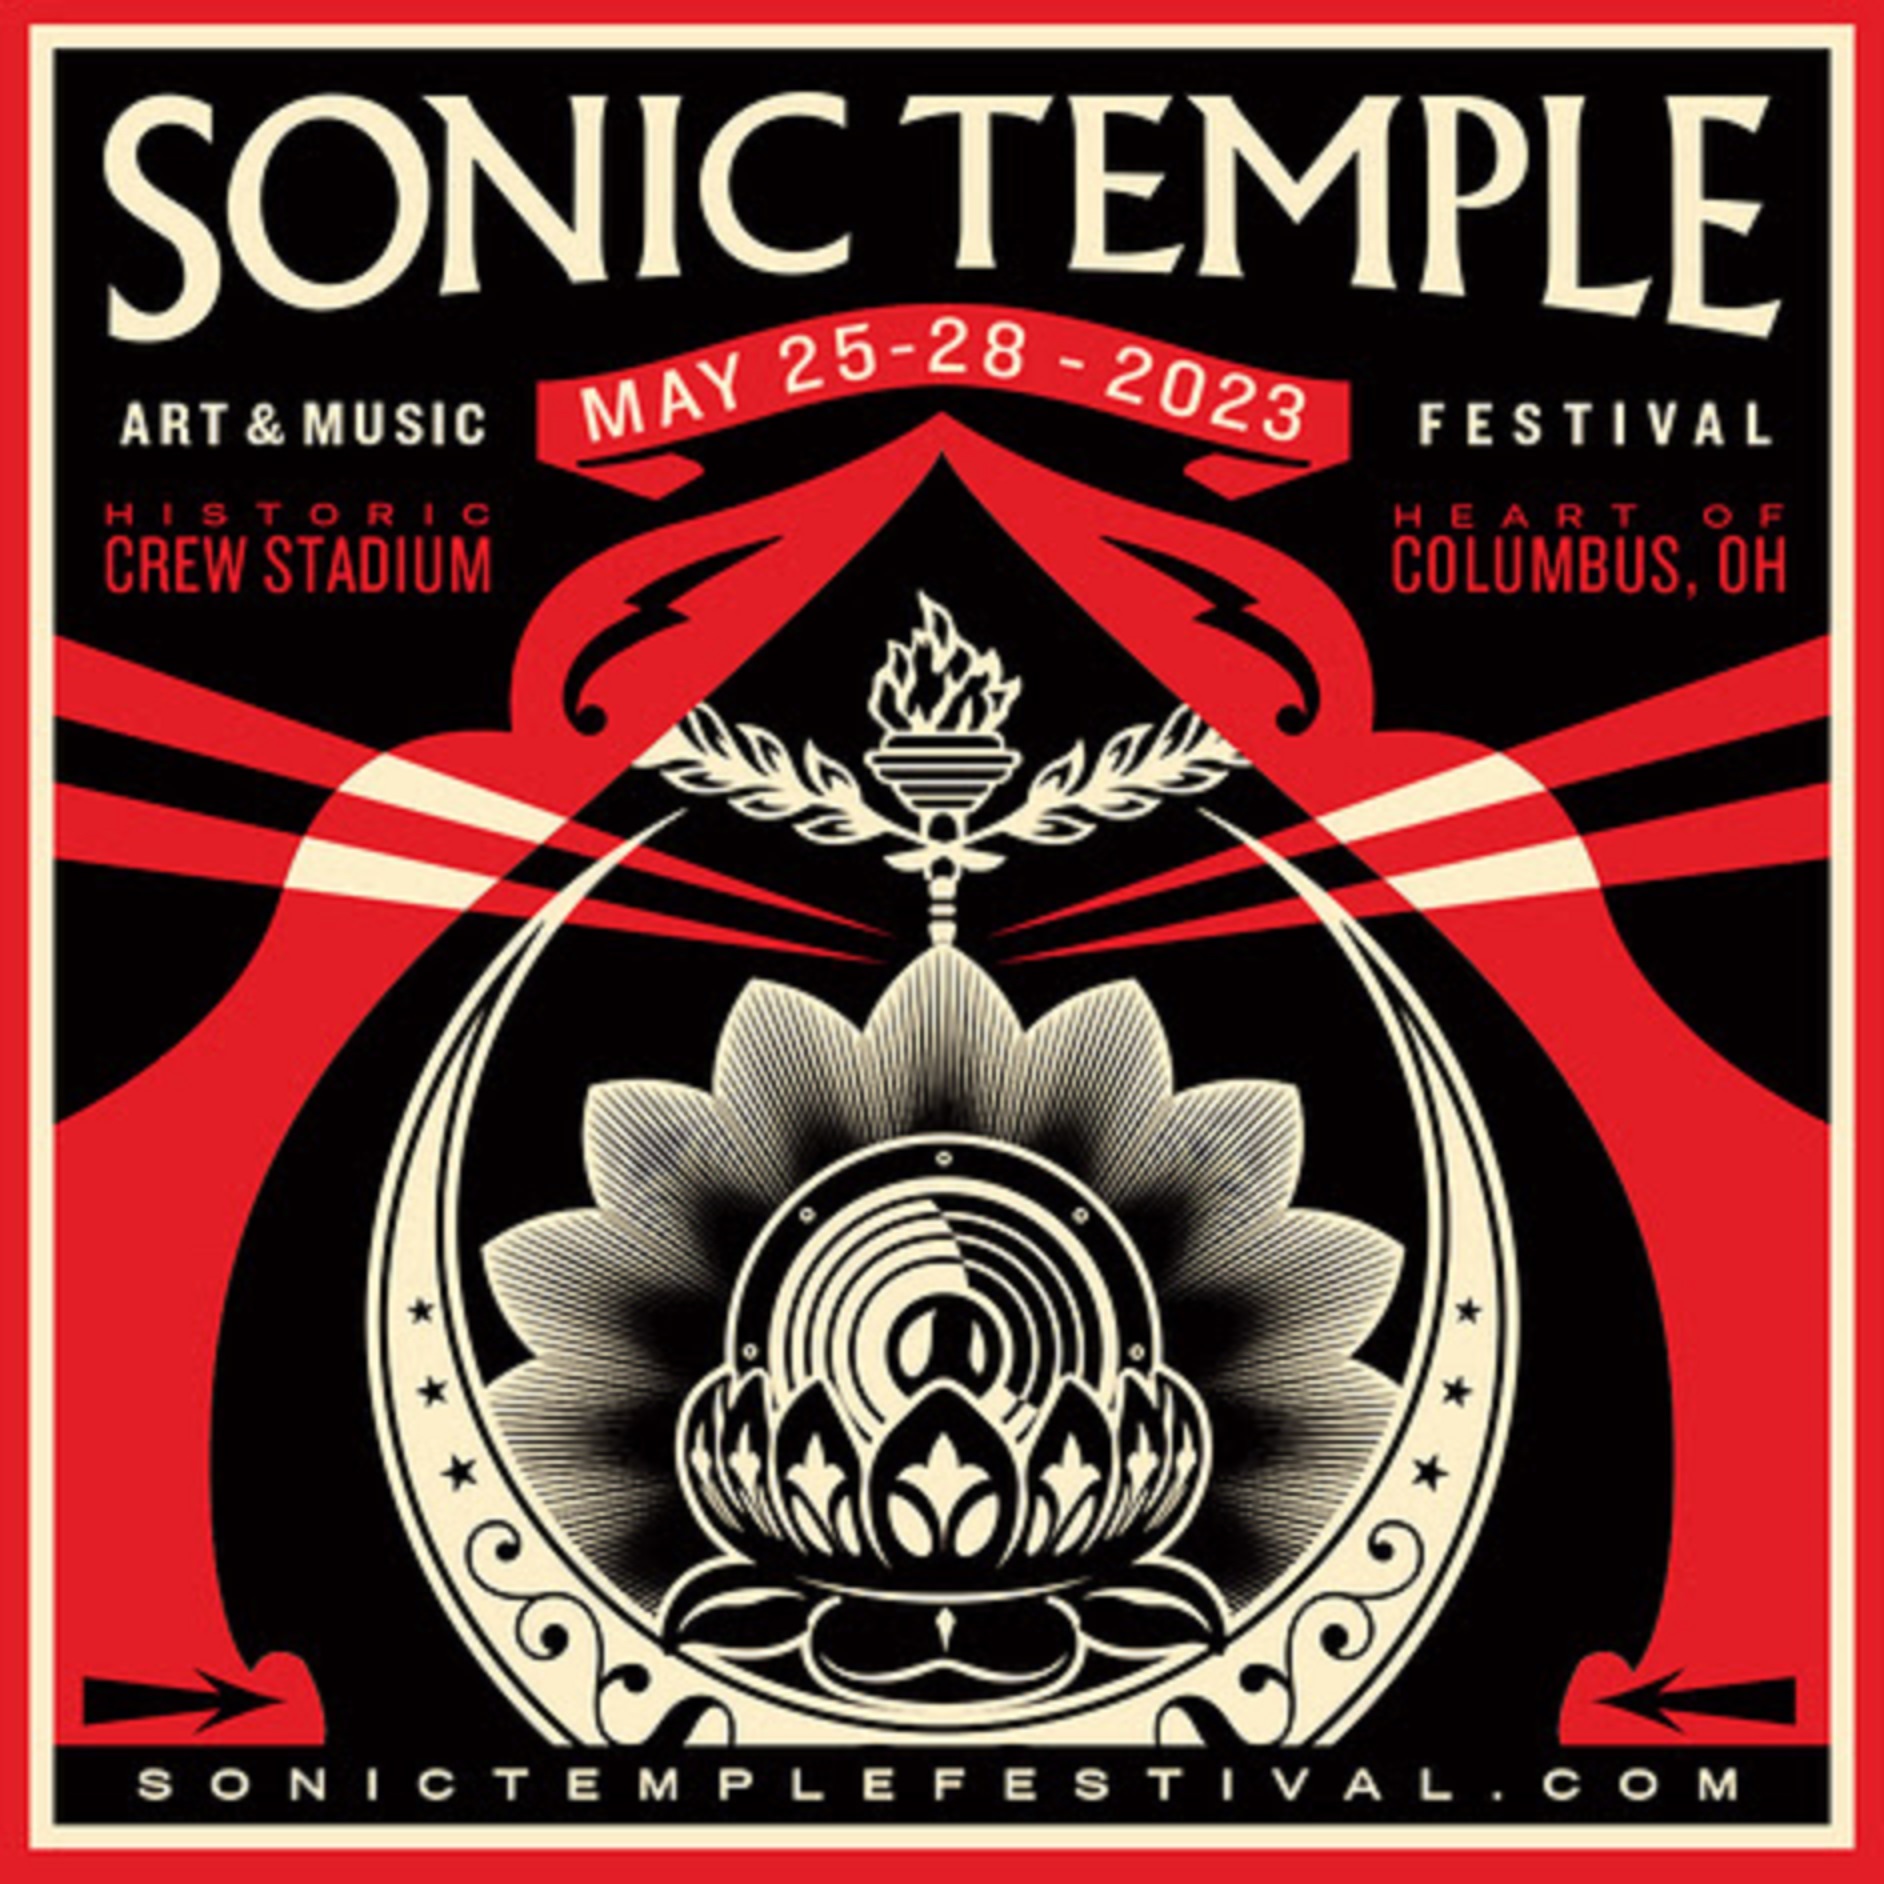 Sonic Temple Art & Music Festival will Return to Columbus, OH Memorial Day Weekend